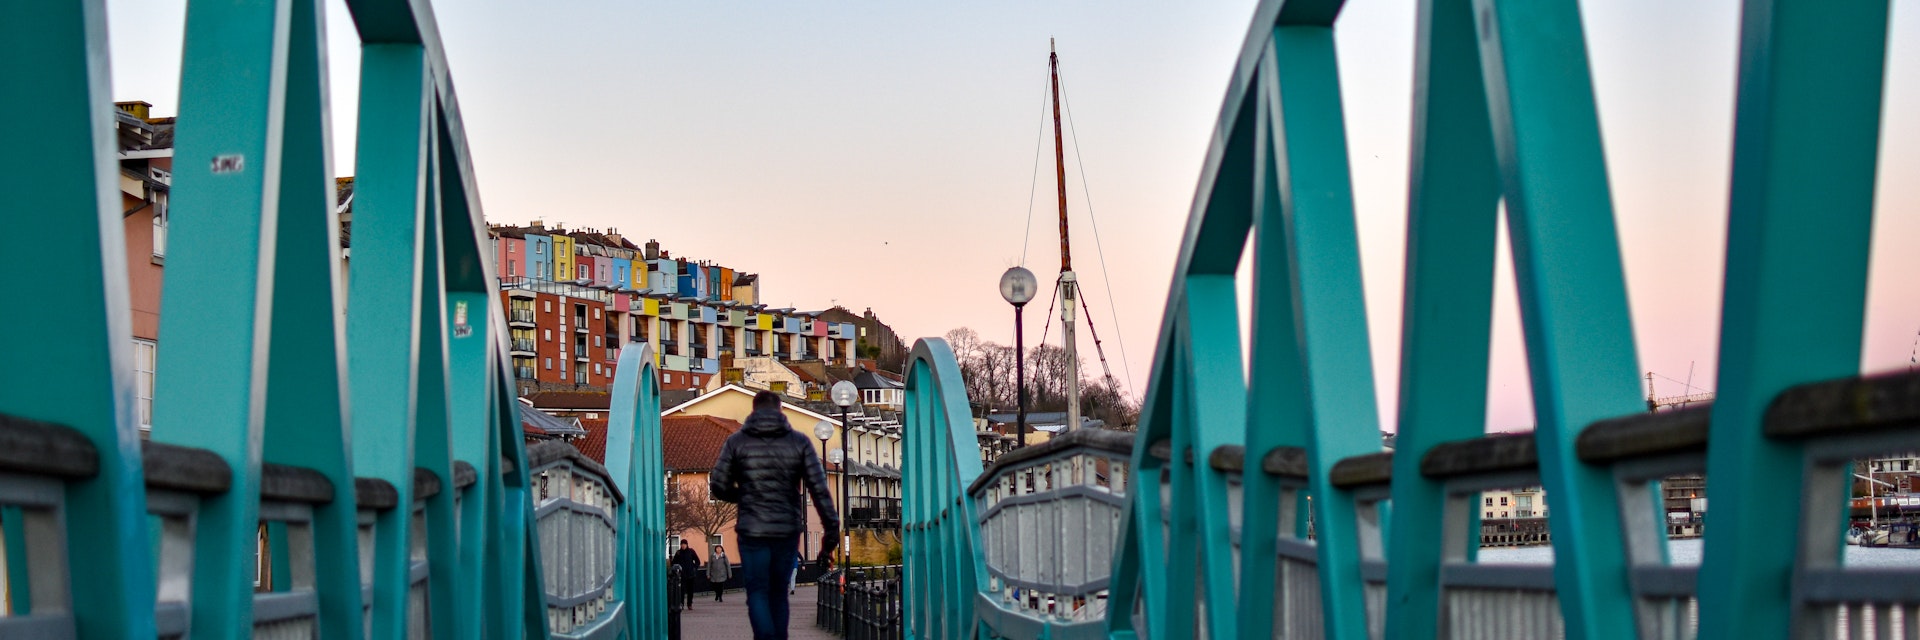 Man walking on Blue / Turquoise footbridge leading from Bristol Harbor towards the well known colorful houses of Clifton -Image; Shutterstock ID 1330383716; your: Sloane Tucker; gl: 65050; netsuite: Online Editorial; full: Destination Page
1330383716